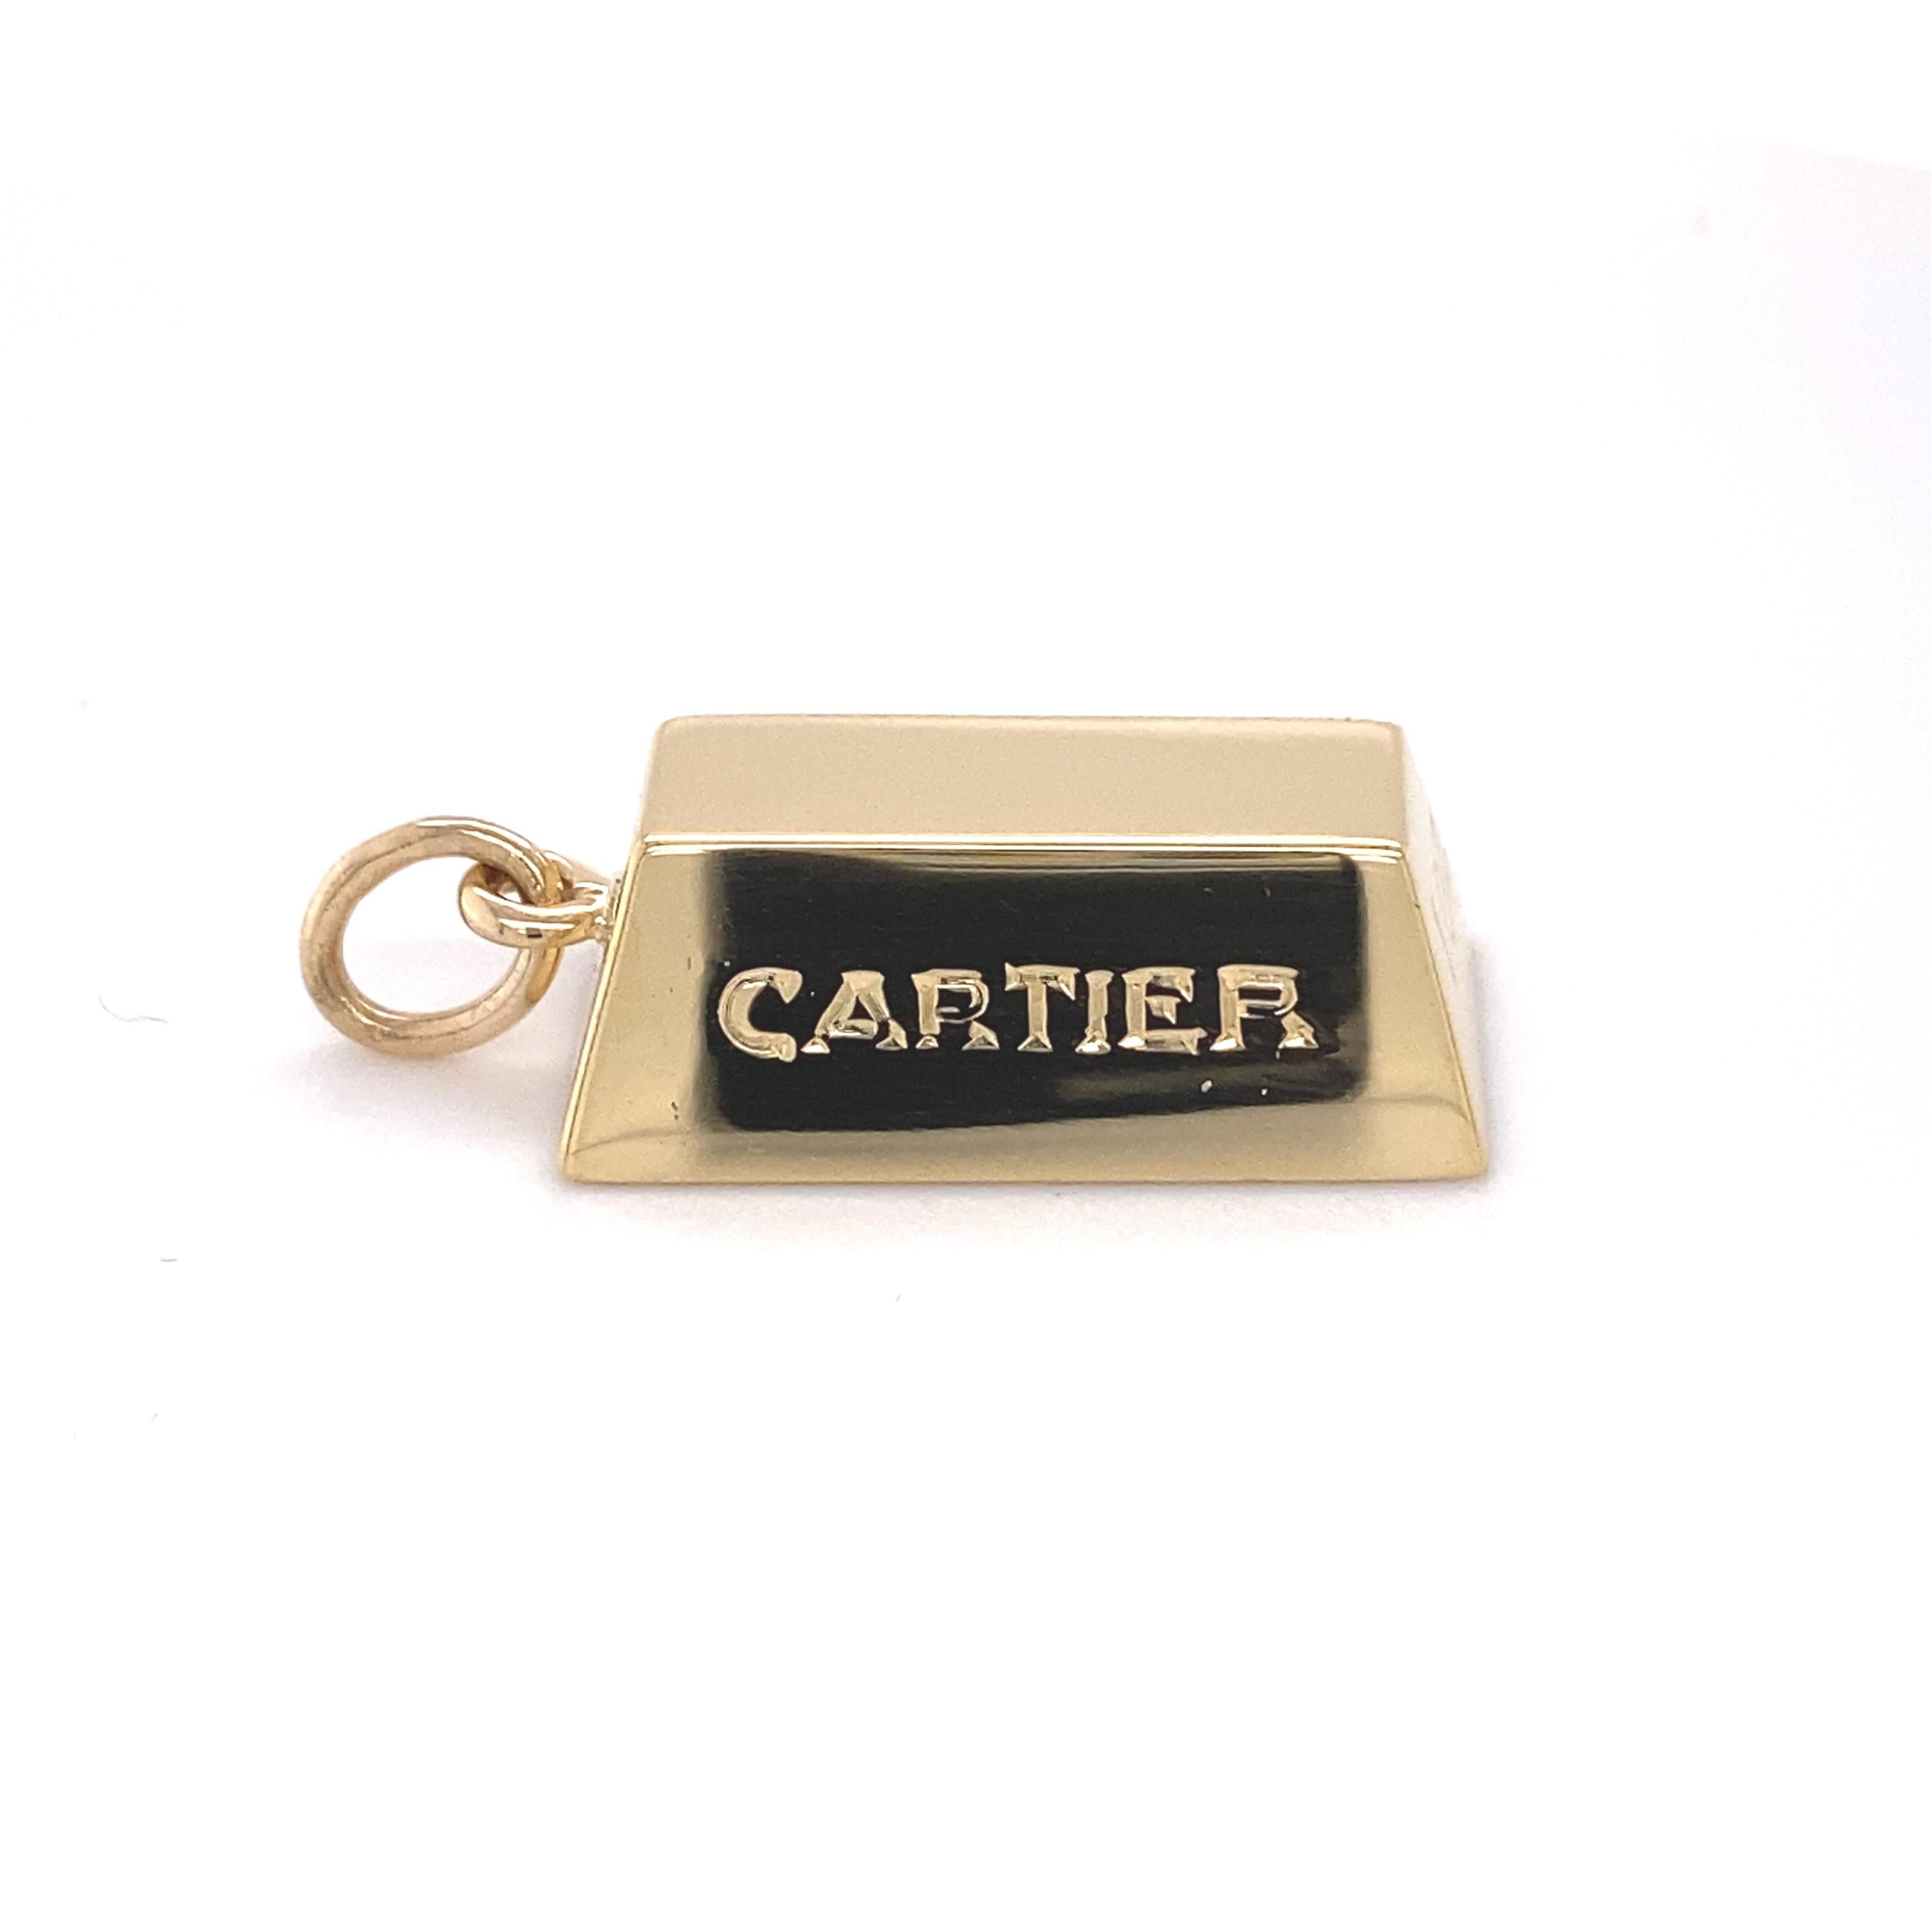 Cartier Vintage Ingot Gold BAr Pendant Charm
Style:  Pendant Charm
Metal:  18kt Yellow Gold
Size - Measurements:  1 Inch - 1.25 inch with Bail / 1/2 inch Wide 
Hallmark:  CARTIER 1 OZ © Cartier 18K
Includes:  Elegant Jewelry